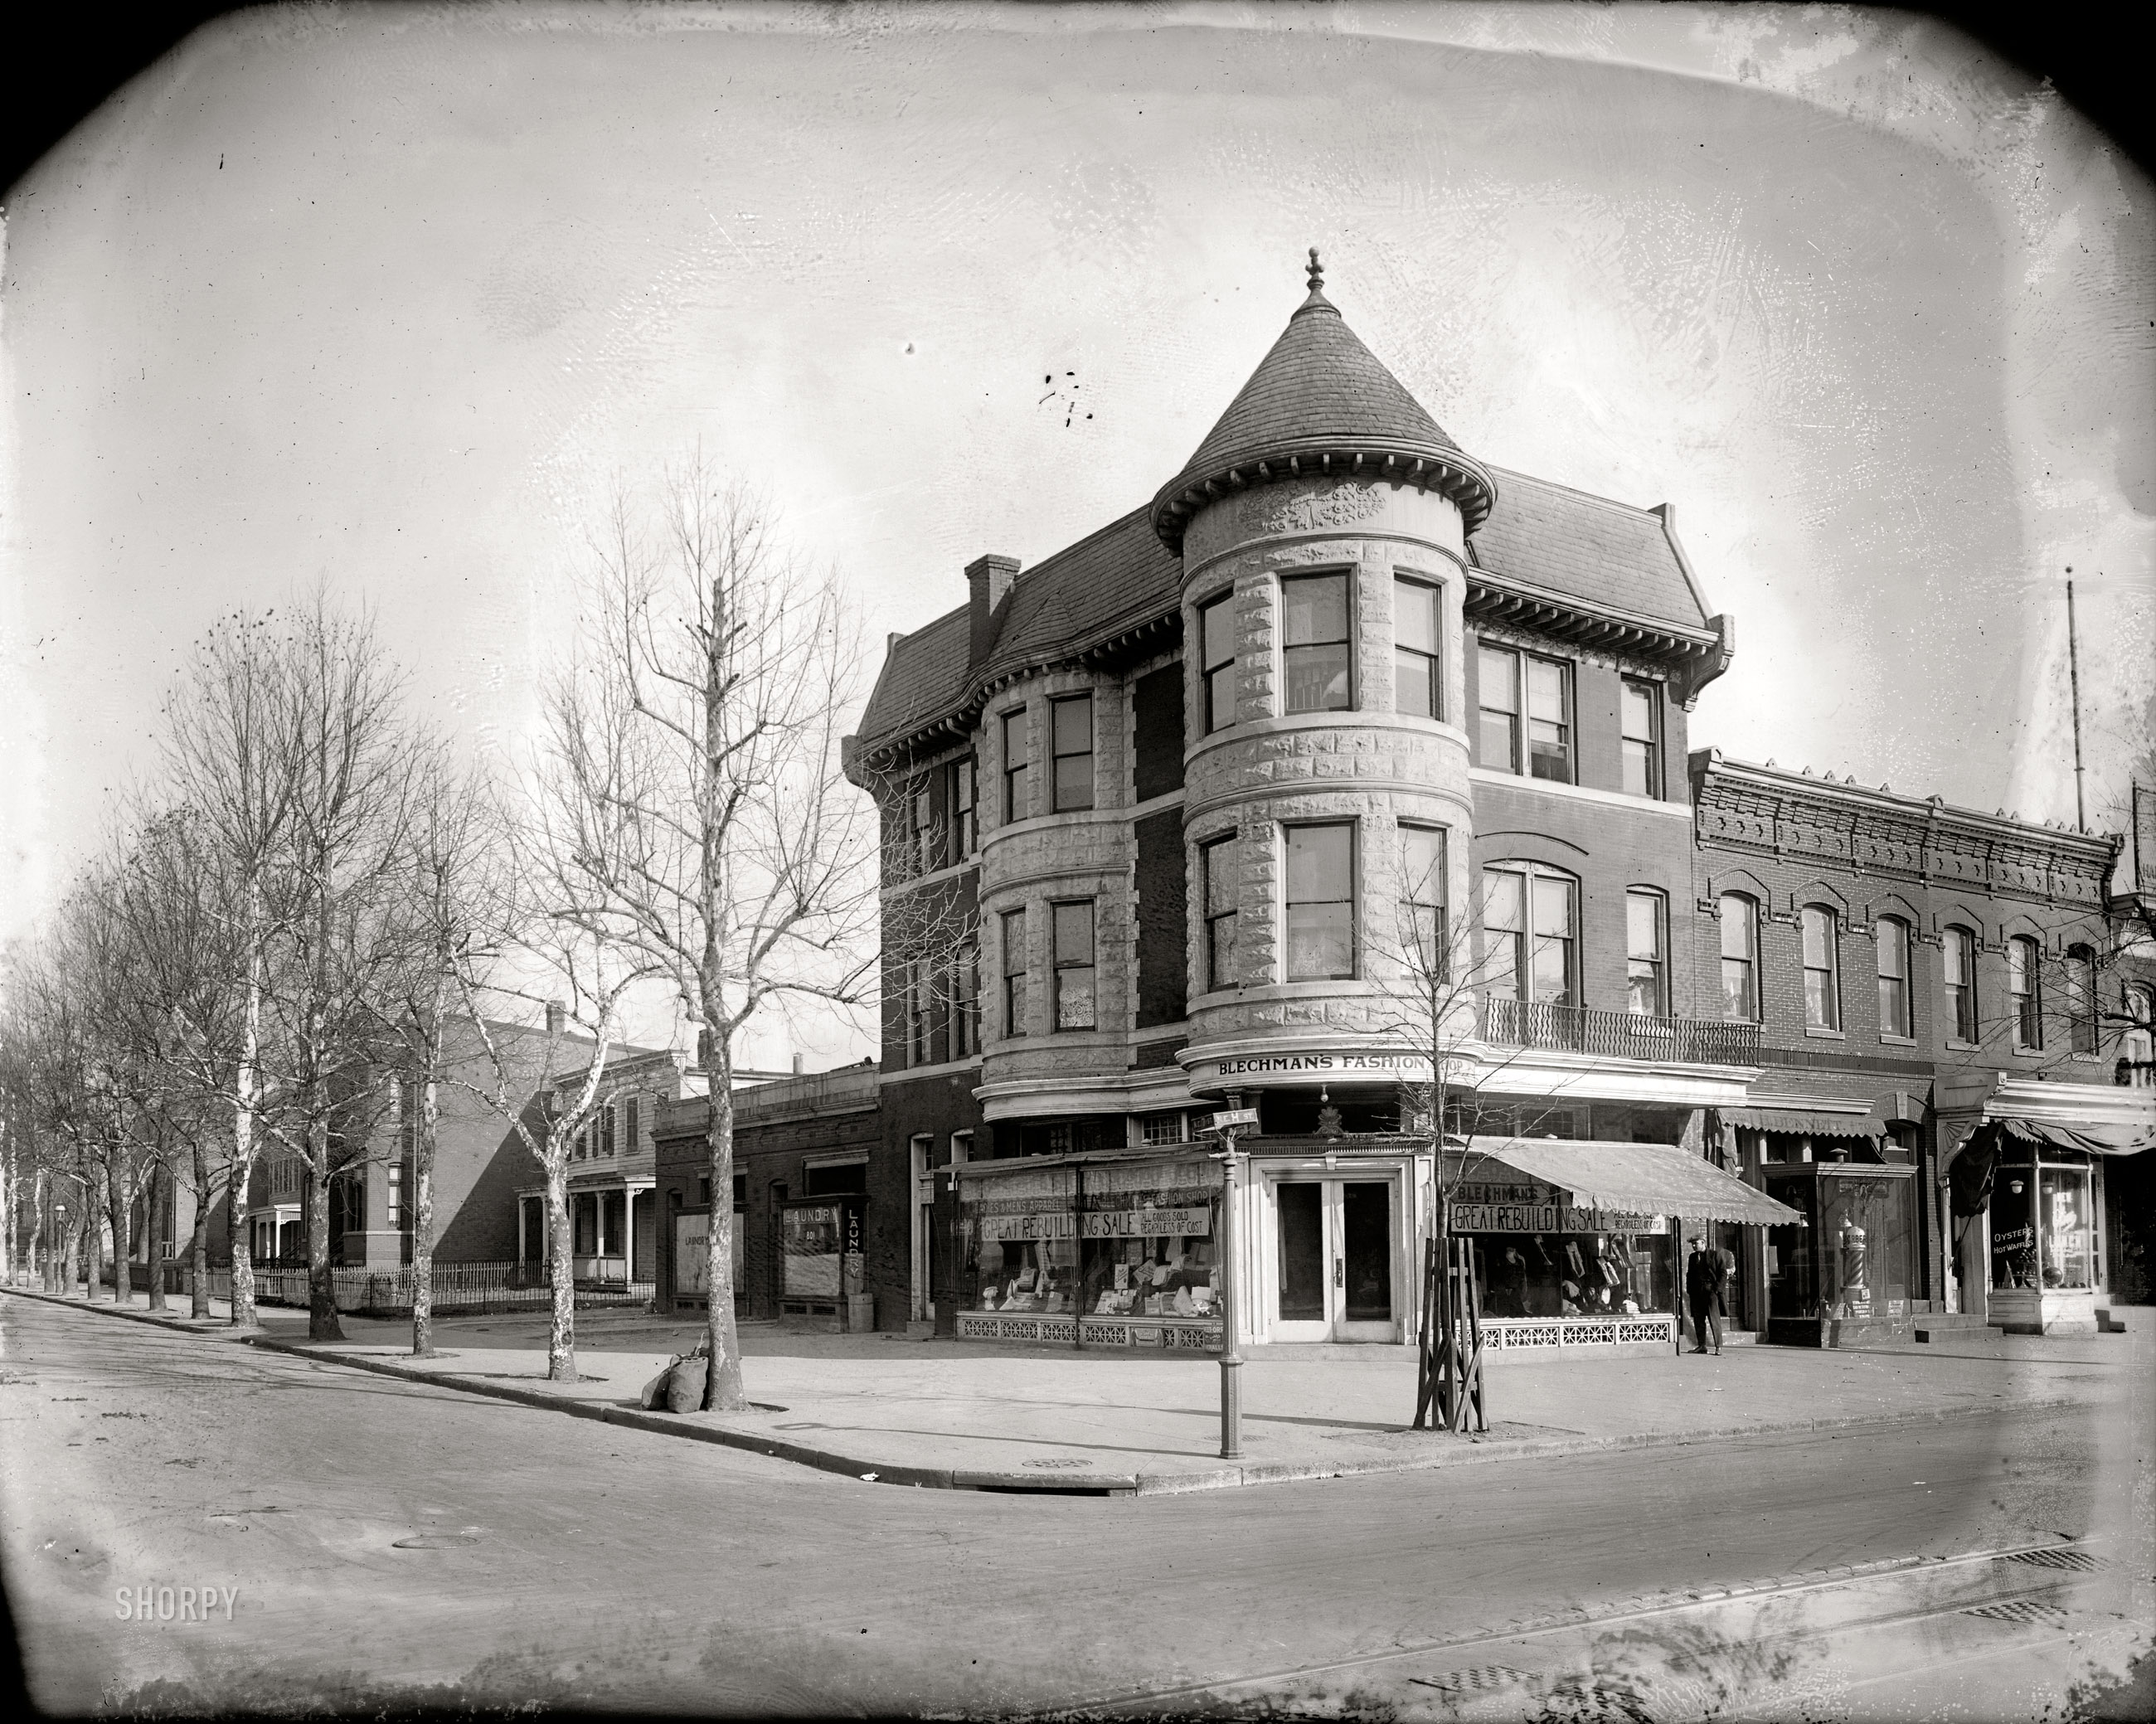 Circa 1920. "Herald, Seventh and H streets N.E." Continuing our culinary tour of the nation's capital, we present the New Olive Cafe, next door to H. Bennett, Barber, and Blechman's Fashion Shop. National Photo Company glass negative. View full size.